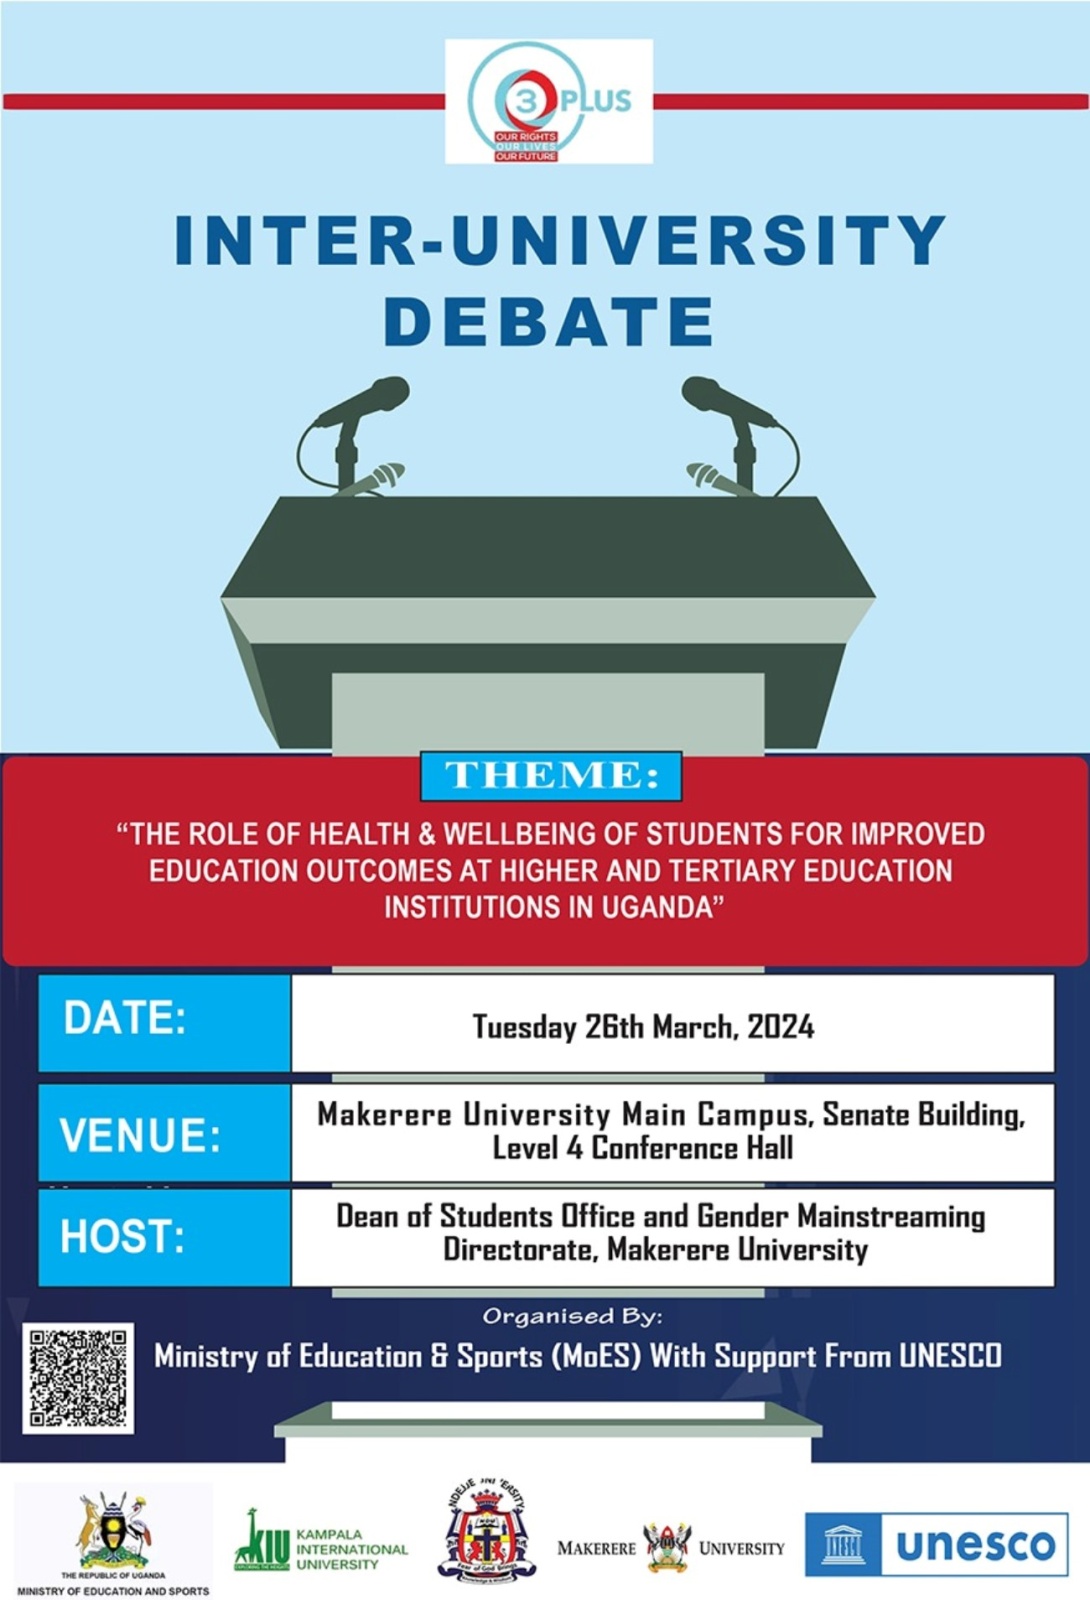 Ministry of Education and Sports (MoES) in partnership with Office of the Dean of Students and Gender Mainstreaming Directorate (GMD) Inter University Debate: "The Role of Health and Wellbeing of Students for Improved Education Outcomes at Higher and Tertiary Education Institutions (HTEIs) in Uganda", 26th March 2024 from 9:00 AM to 1:00 PM EAT, Conference Hall, Level 4, Senate Building, Makerere University, Kampala Uganda, East Africa and Online.